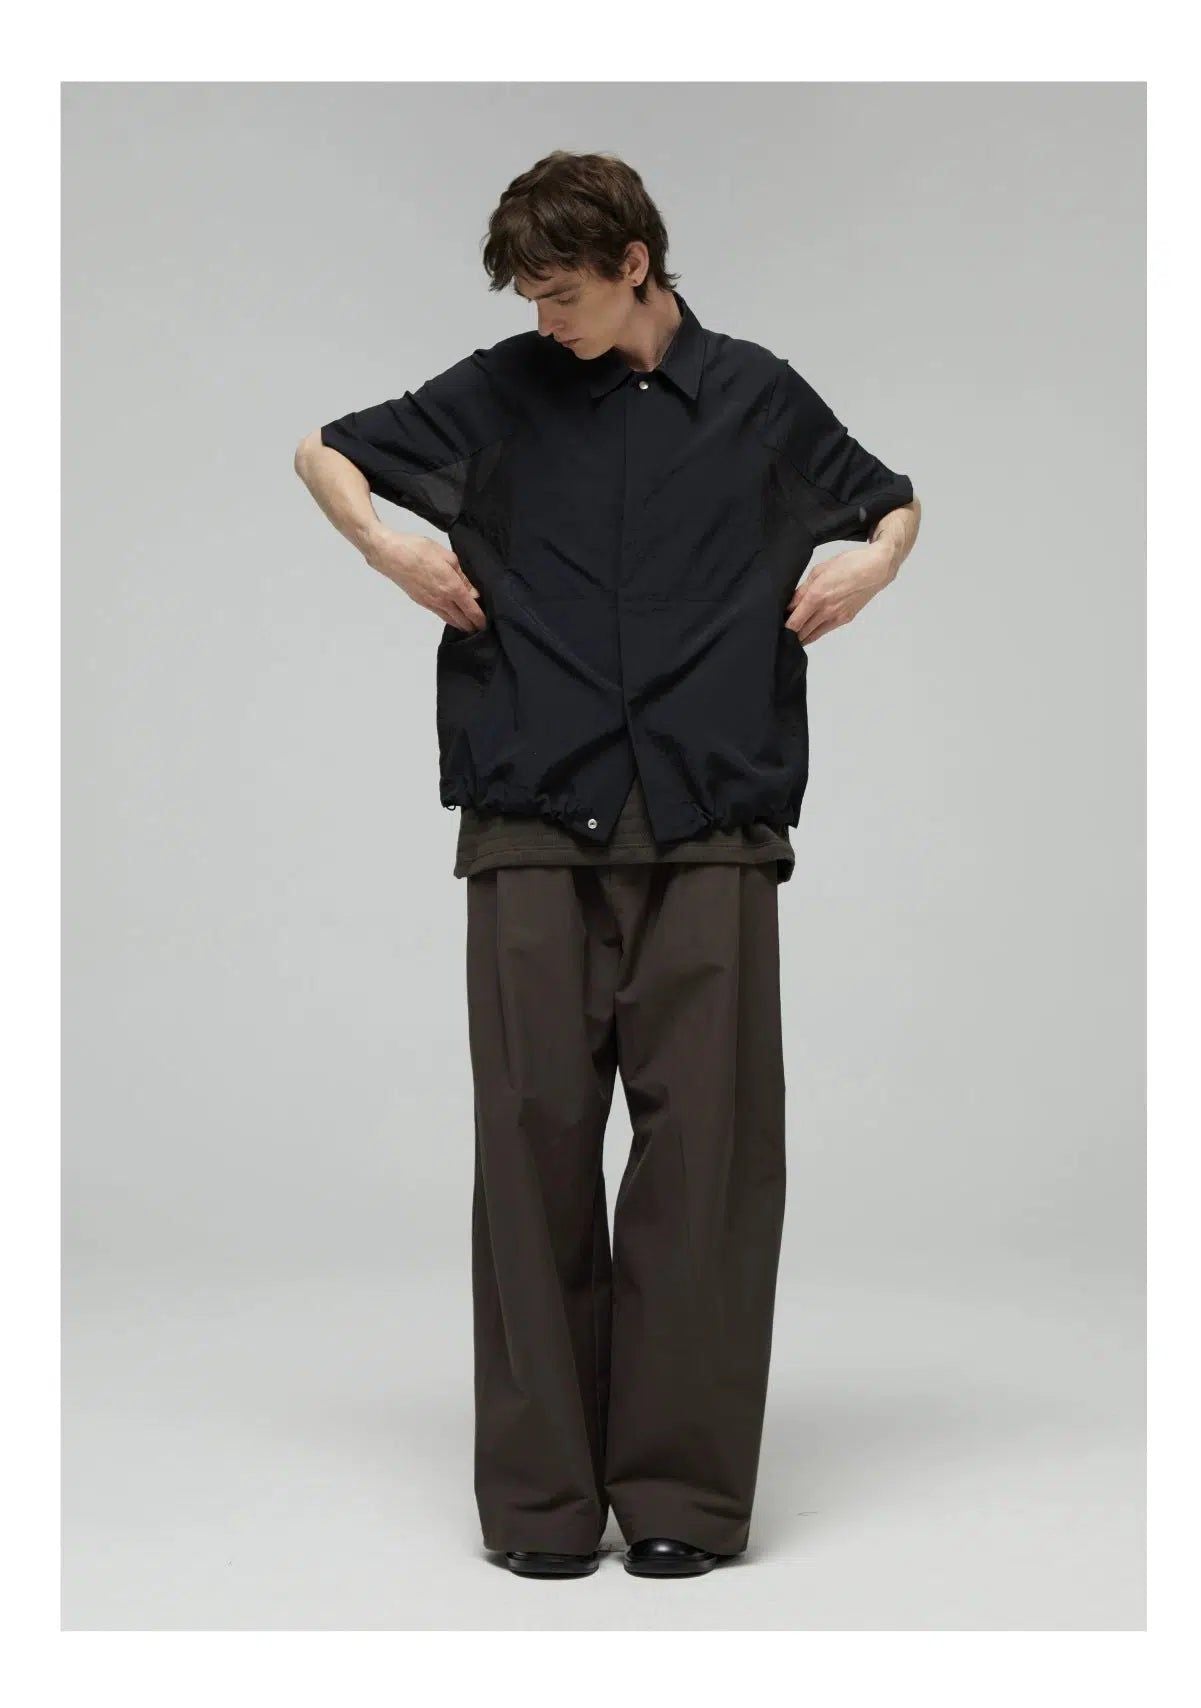 Multi-Color Spliced Shirt Korean Street Fashion Shirt By Decesolo Shop Online at OH Vault